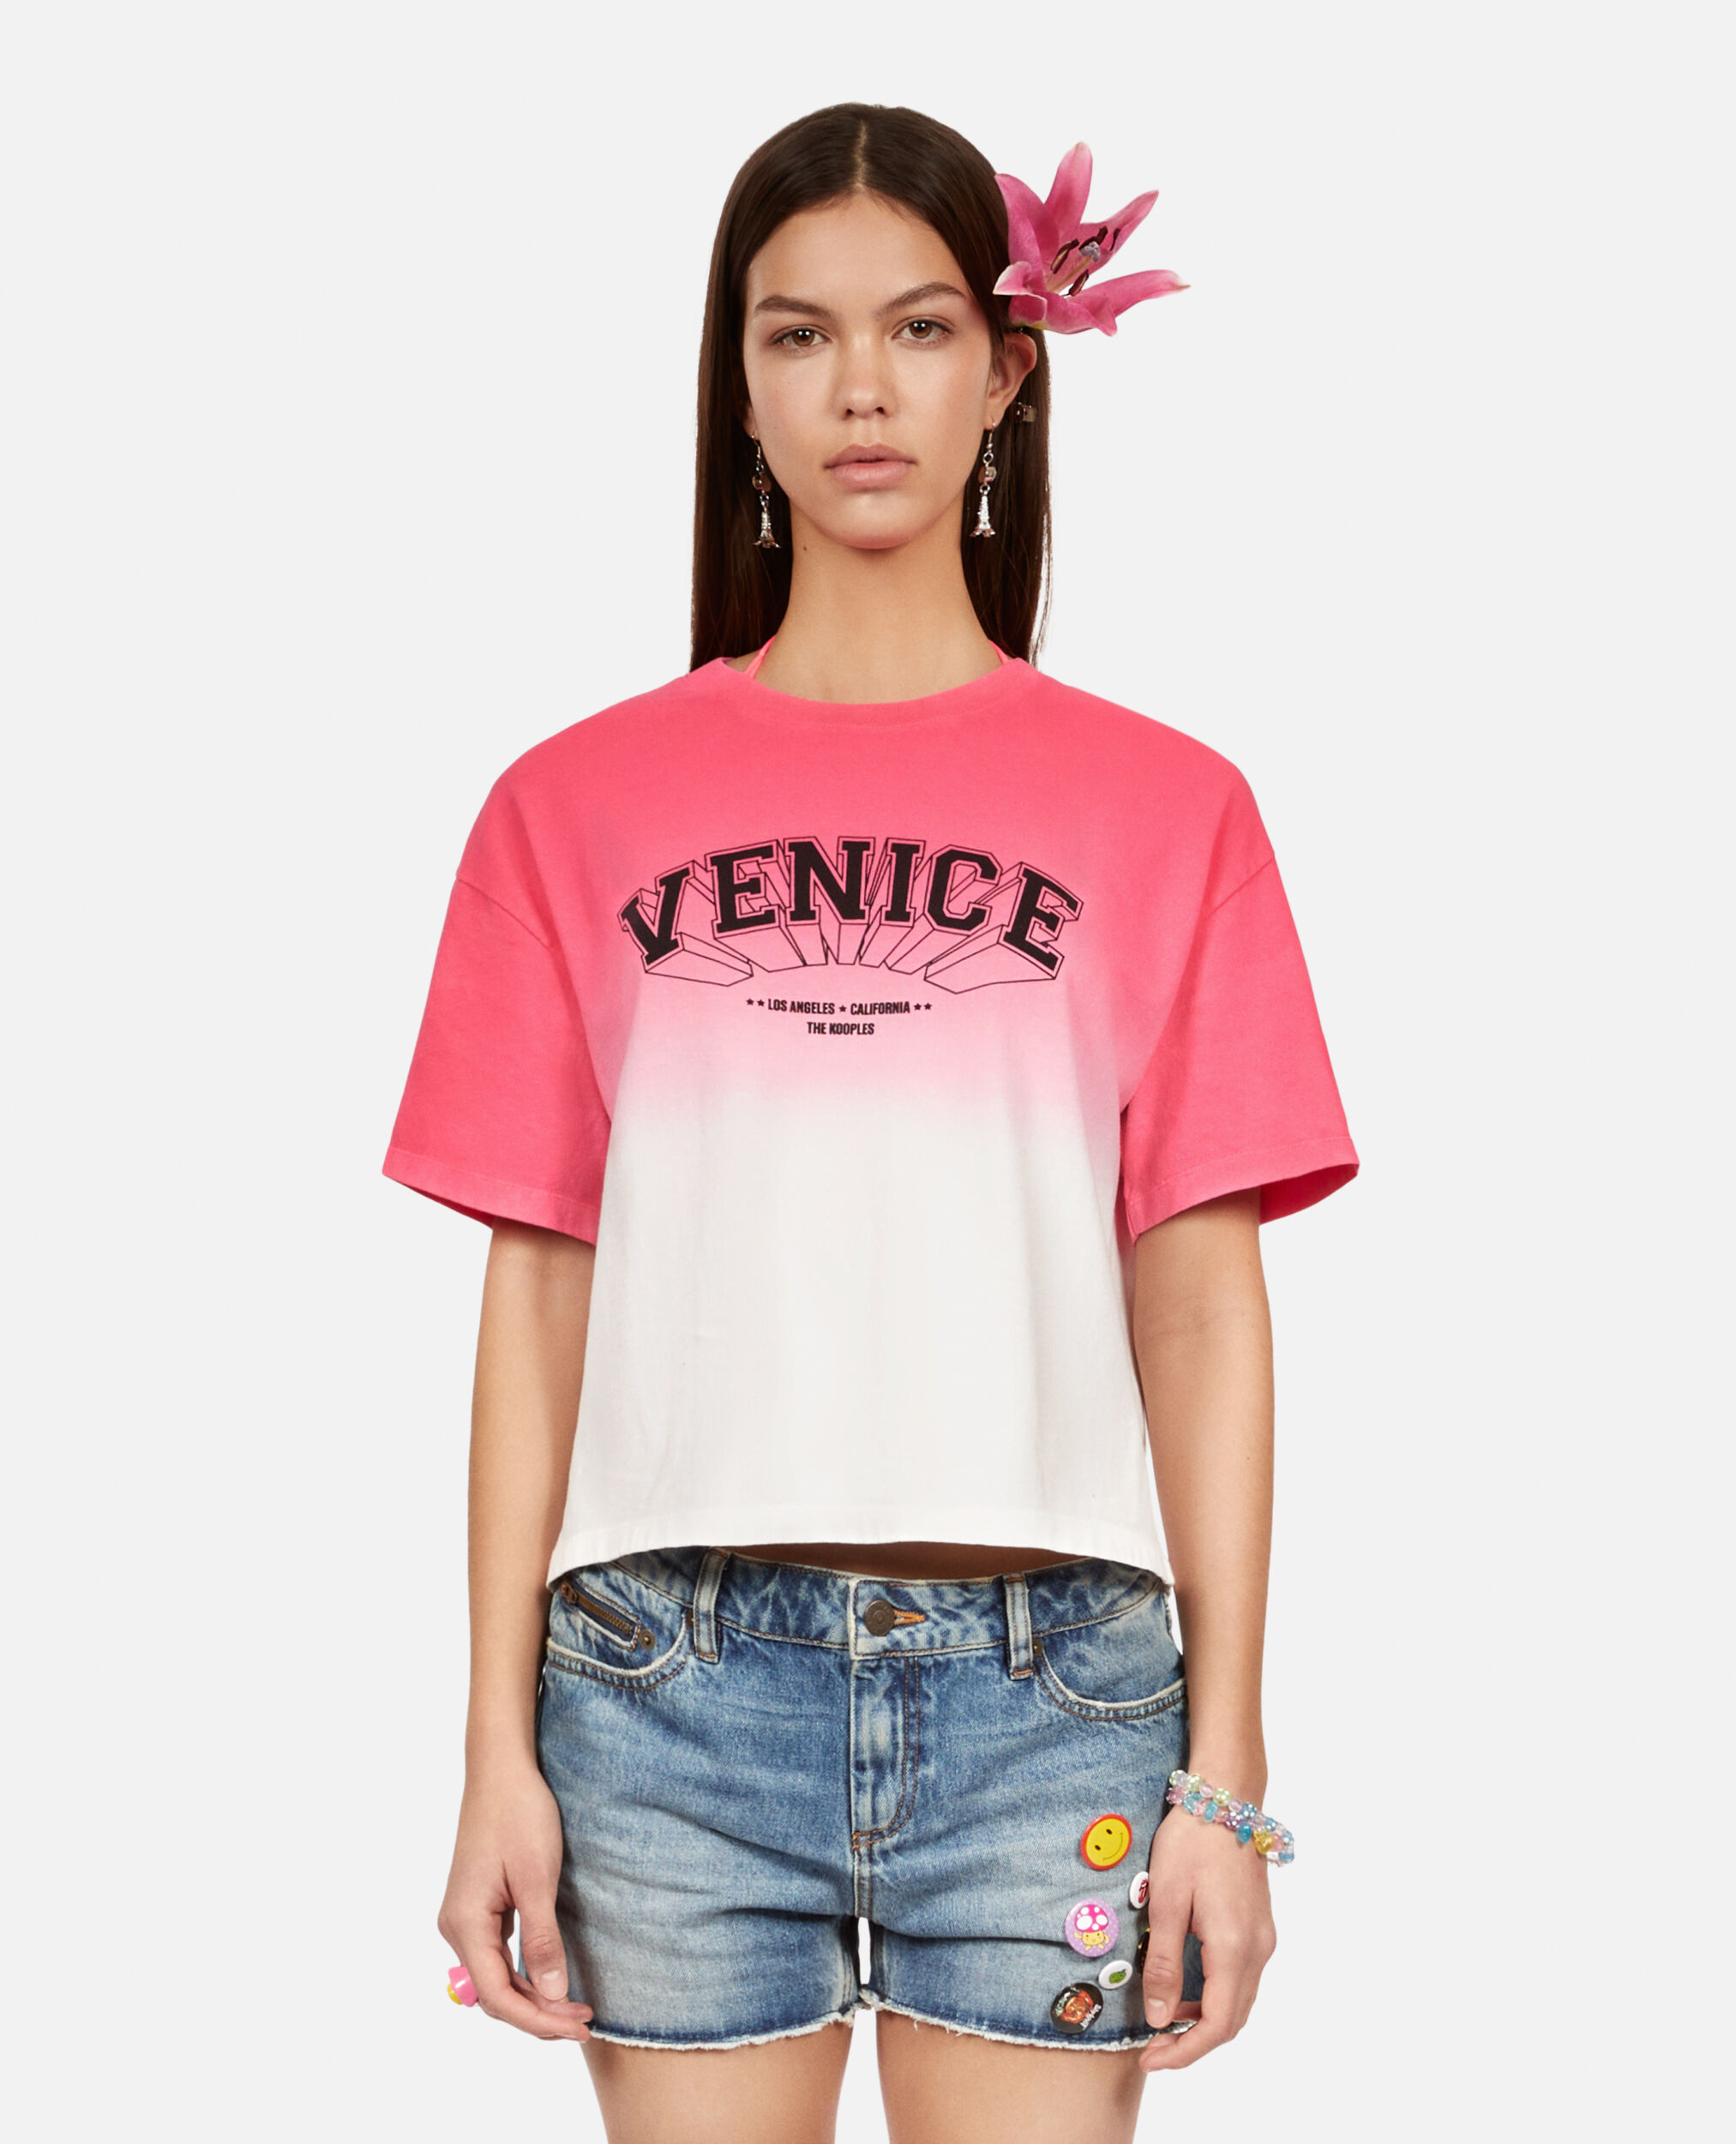 Gradient pink T-shirt with Venice serigraphy, RETRO PINK, hi-res image number null